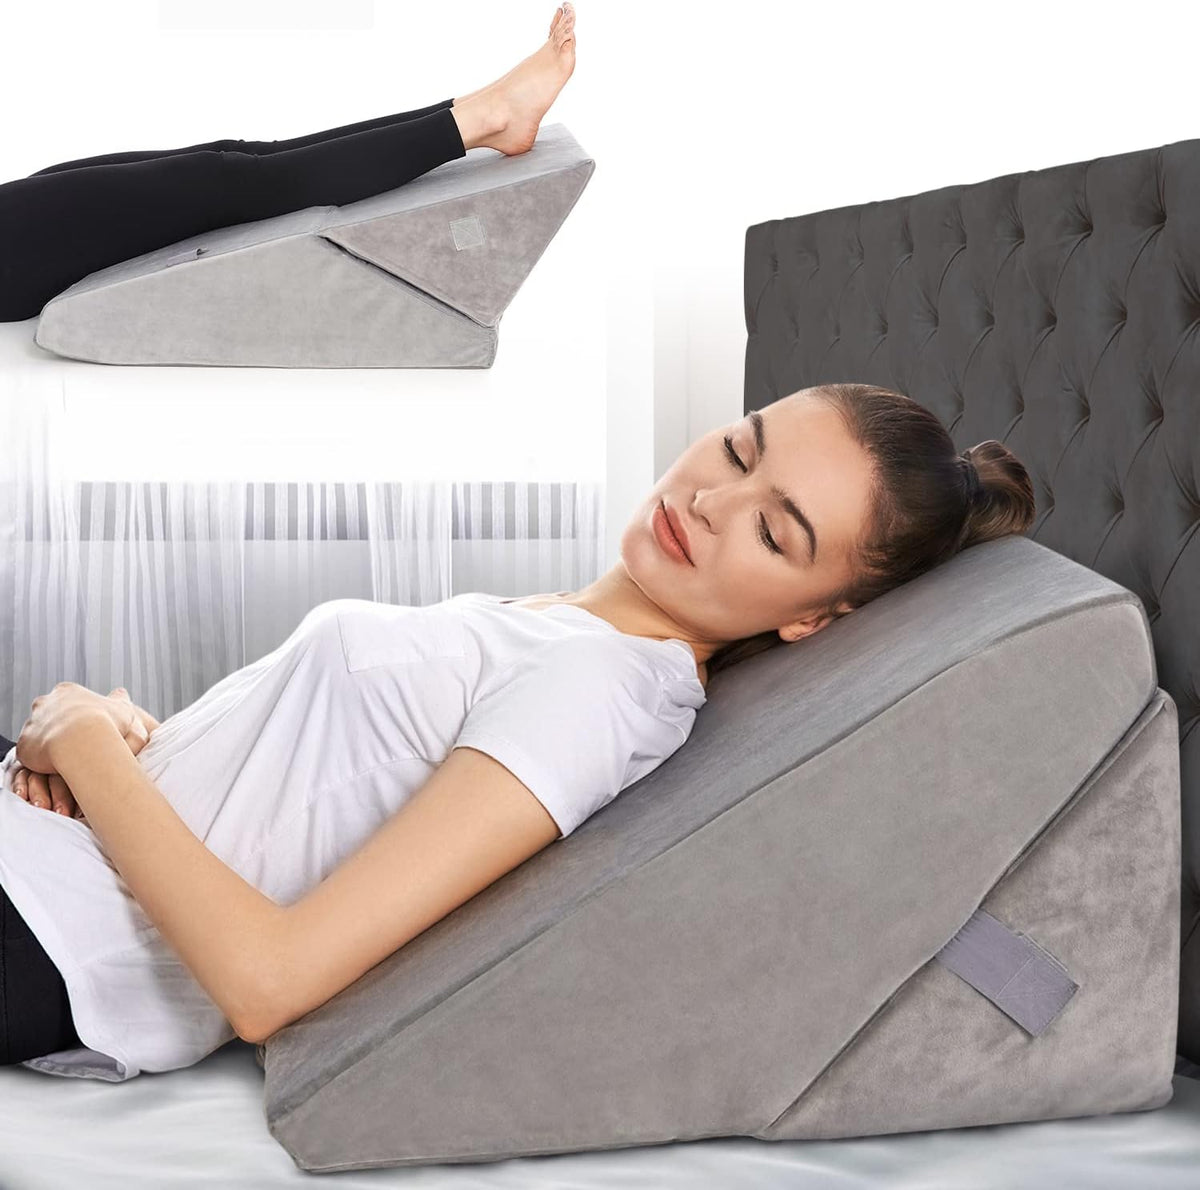 Lumbar Support Wedge Pillow Sleep Pregnant Bed Cushions Lower Back Pain  Relief